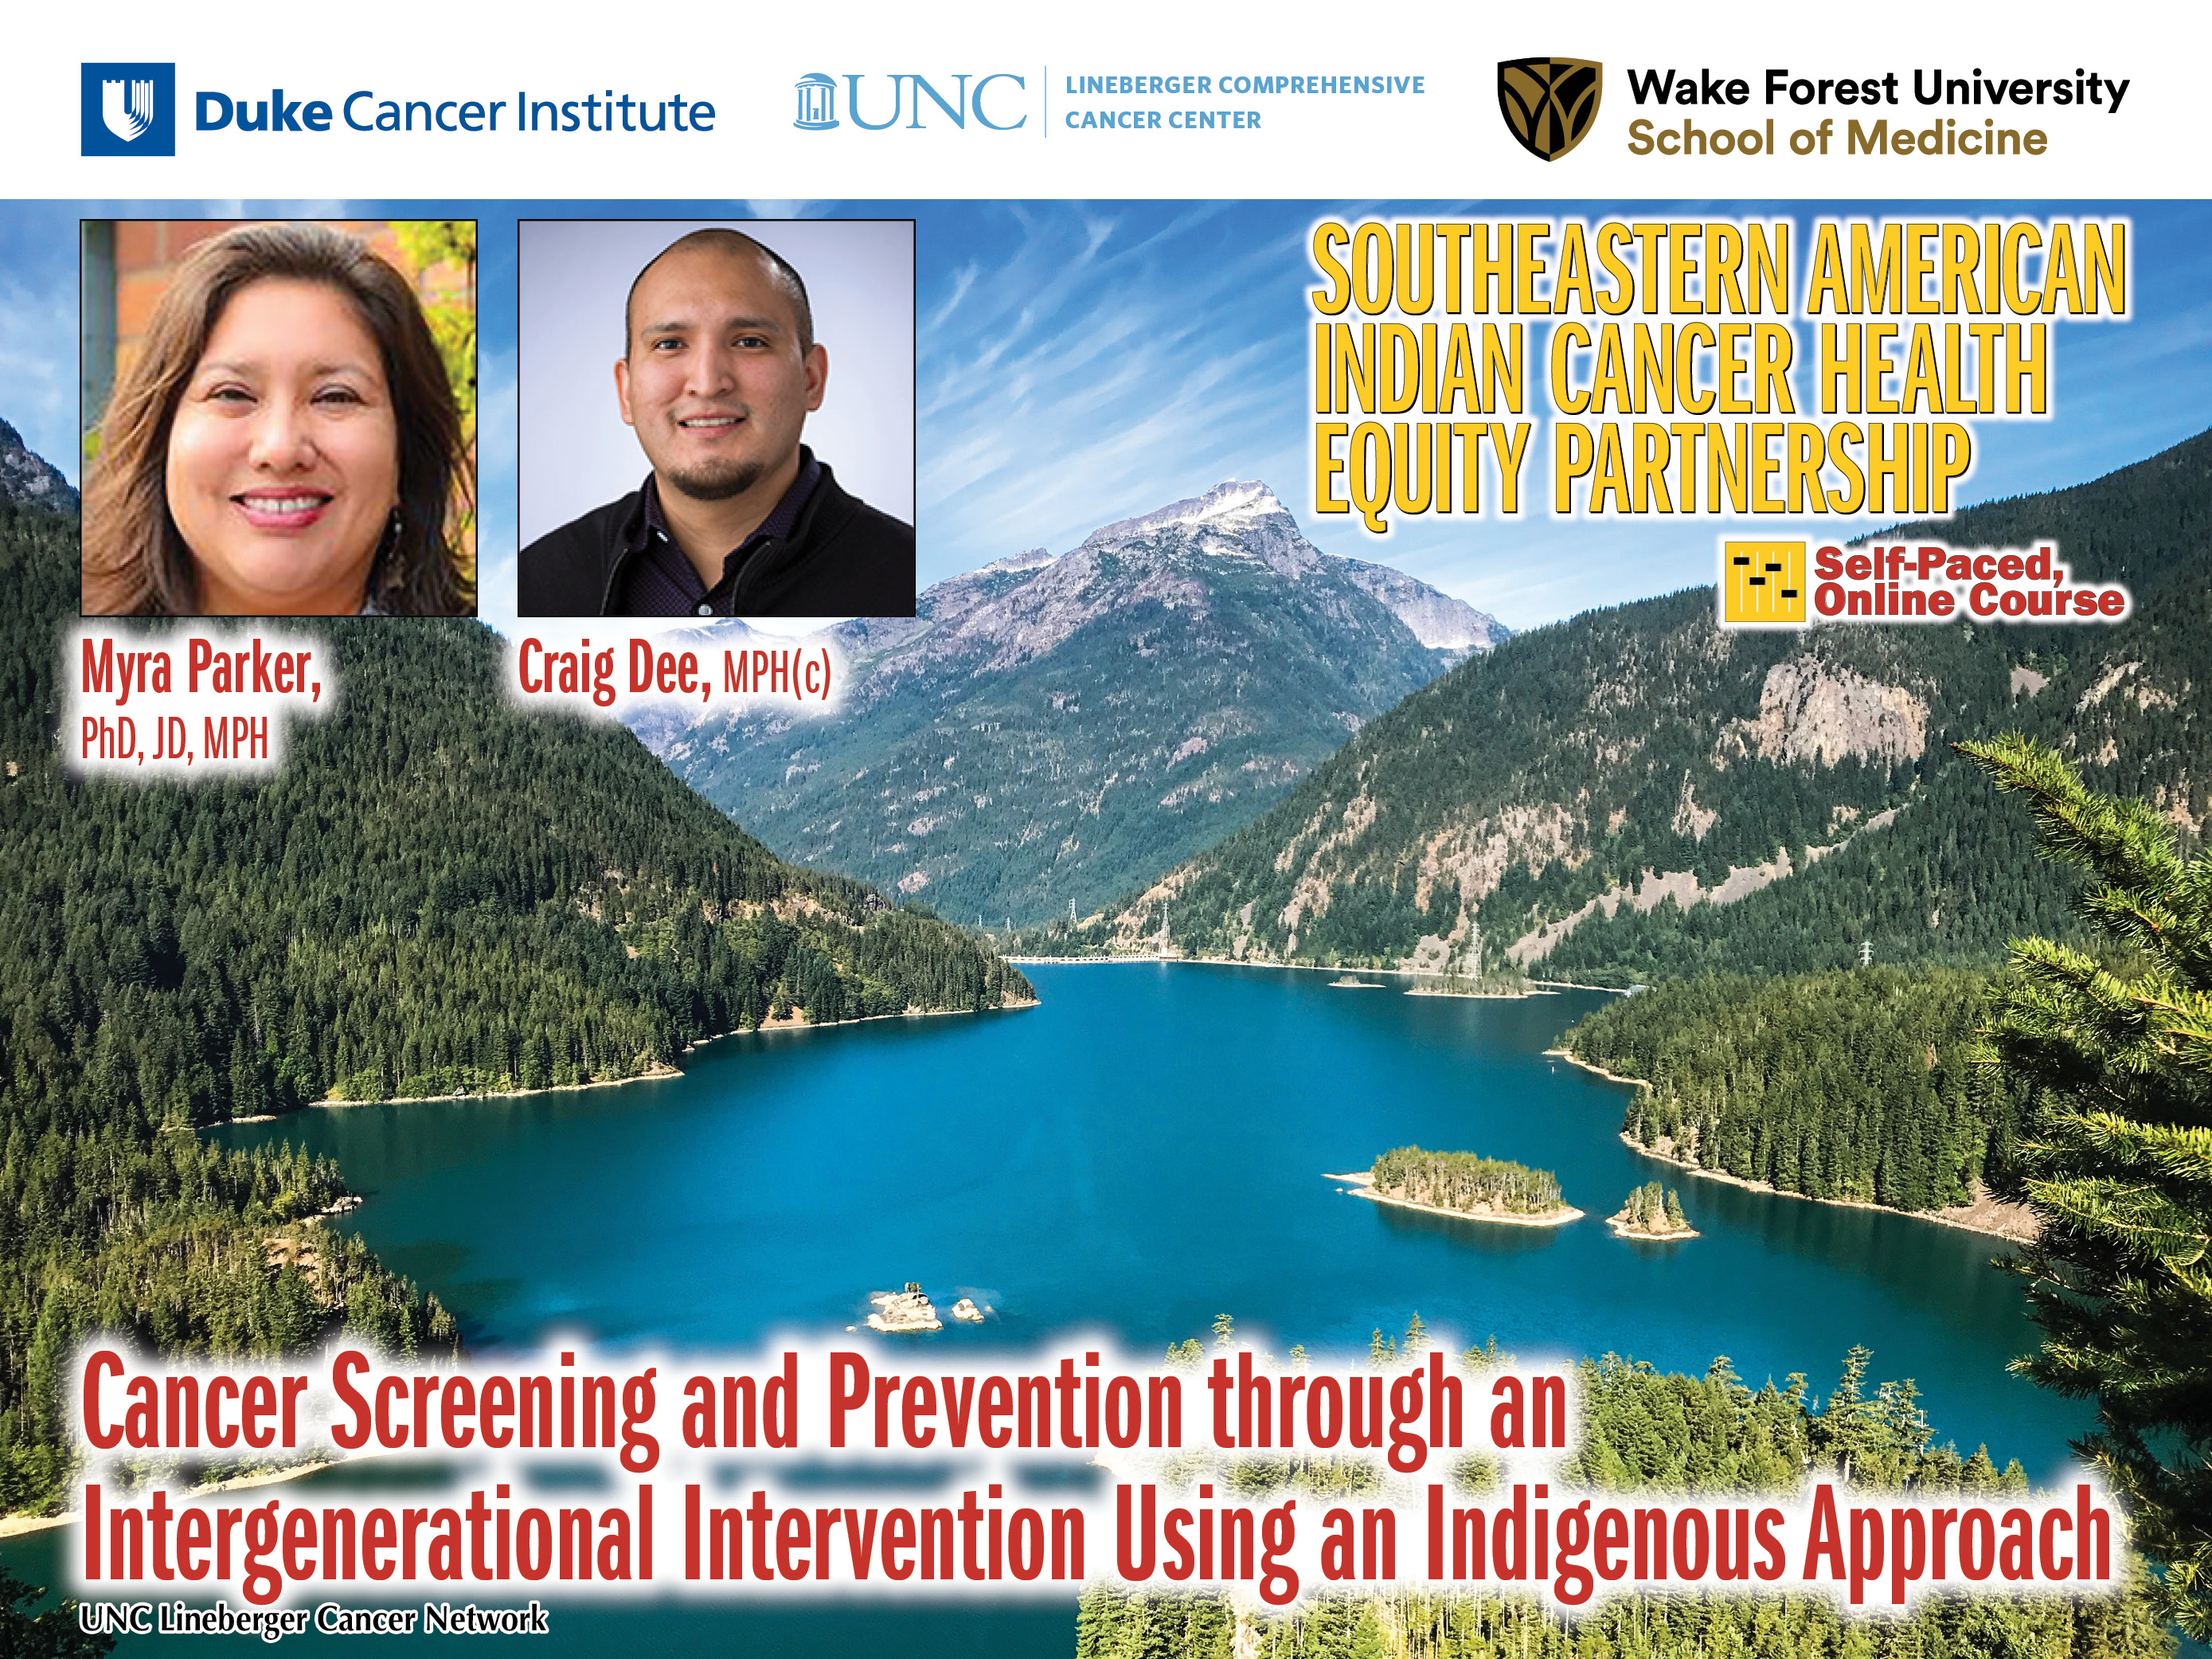 Cancer Screening and Prevention through an Intergenerational Intervention Using an Indigenous Approach